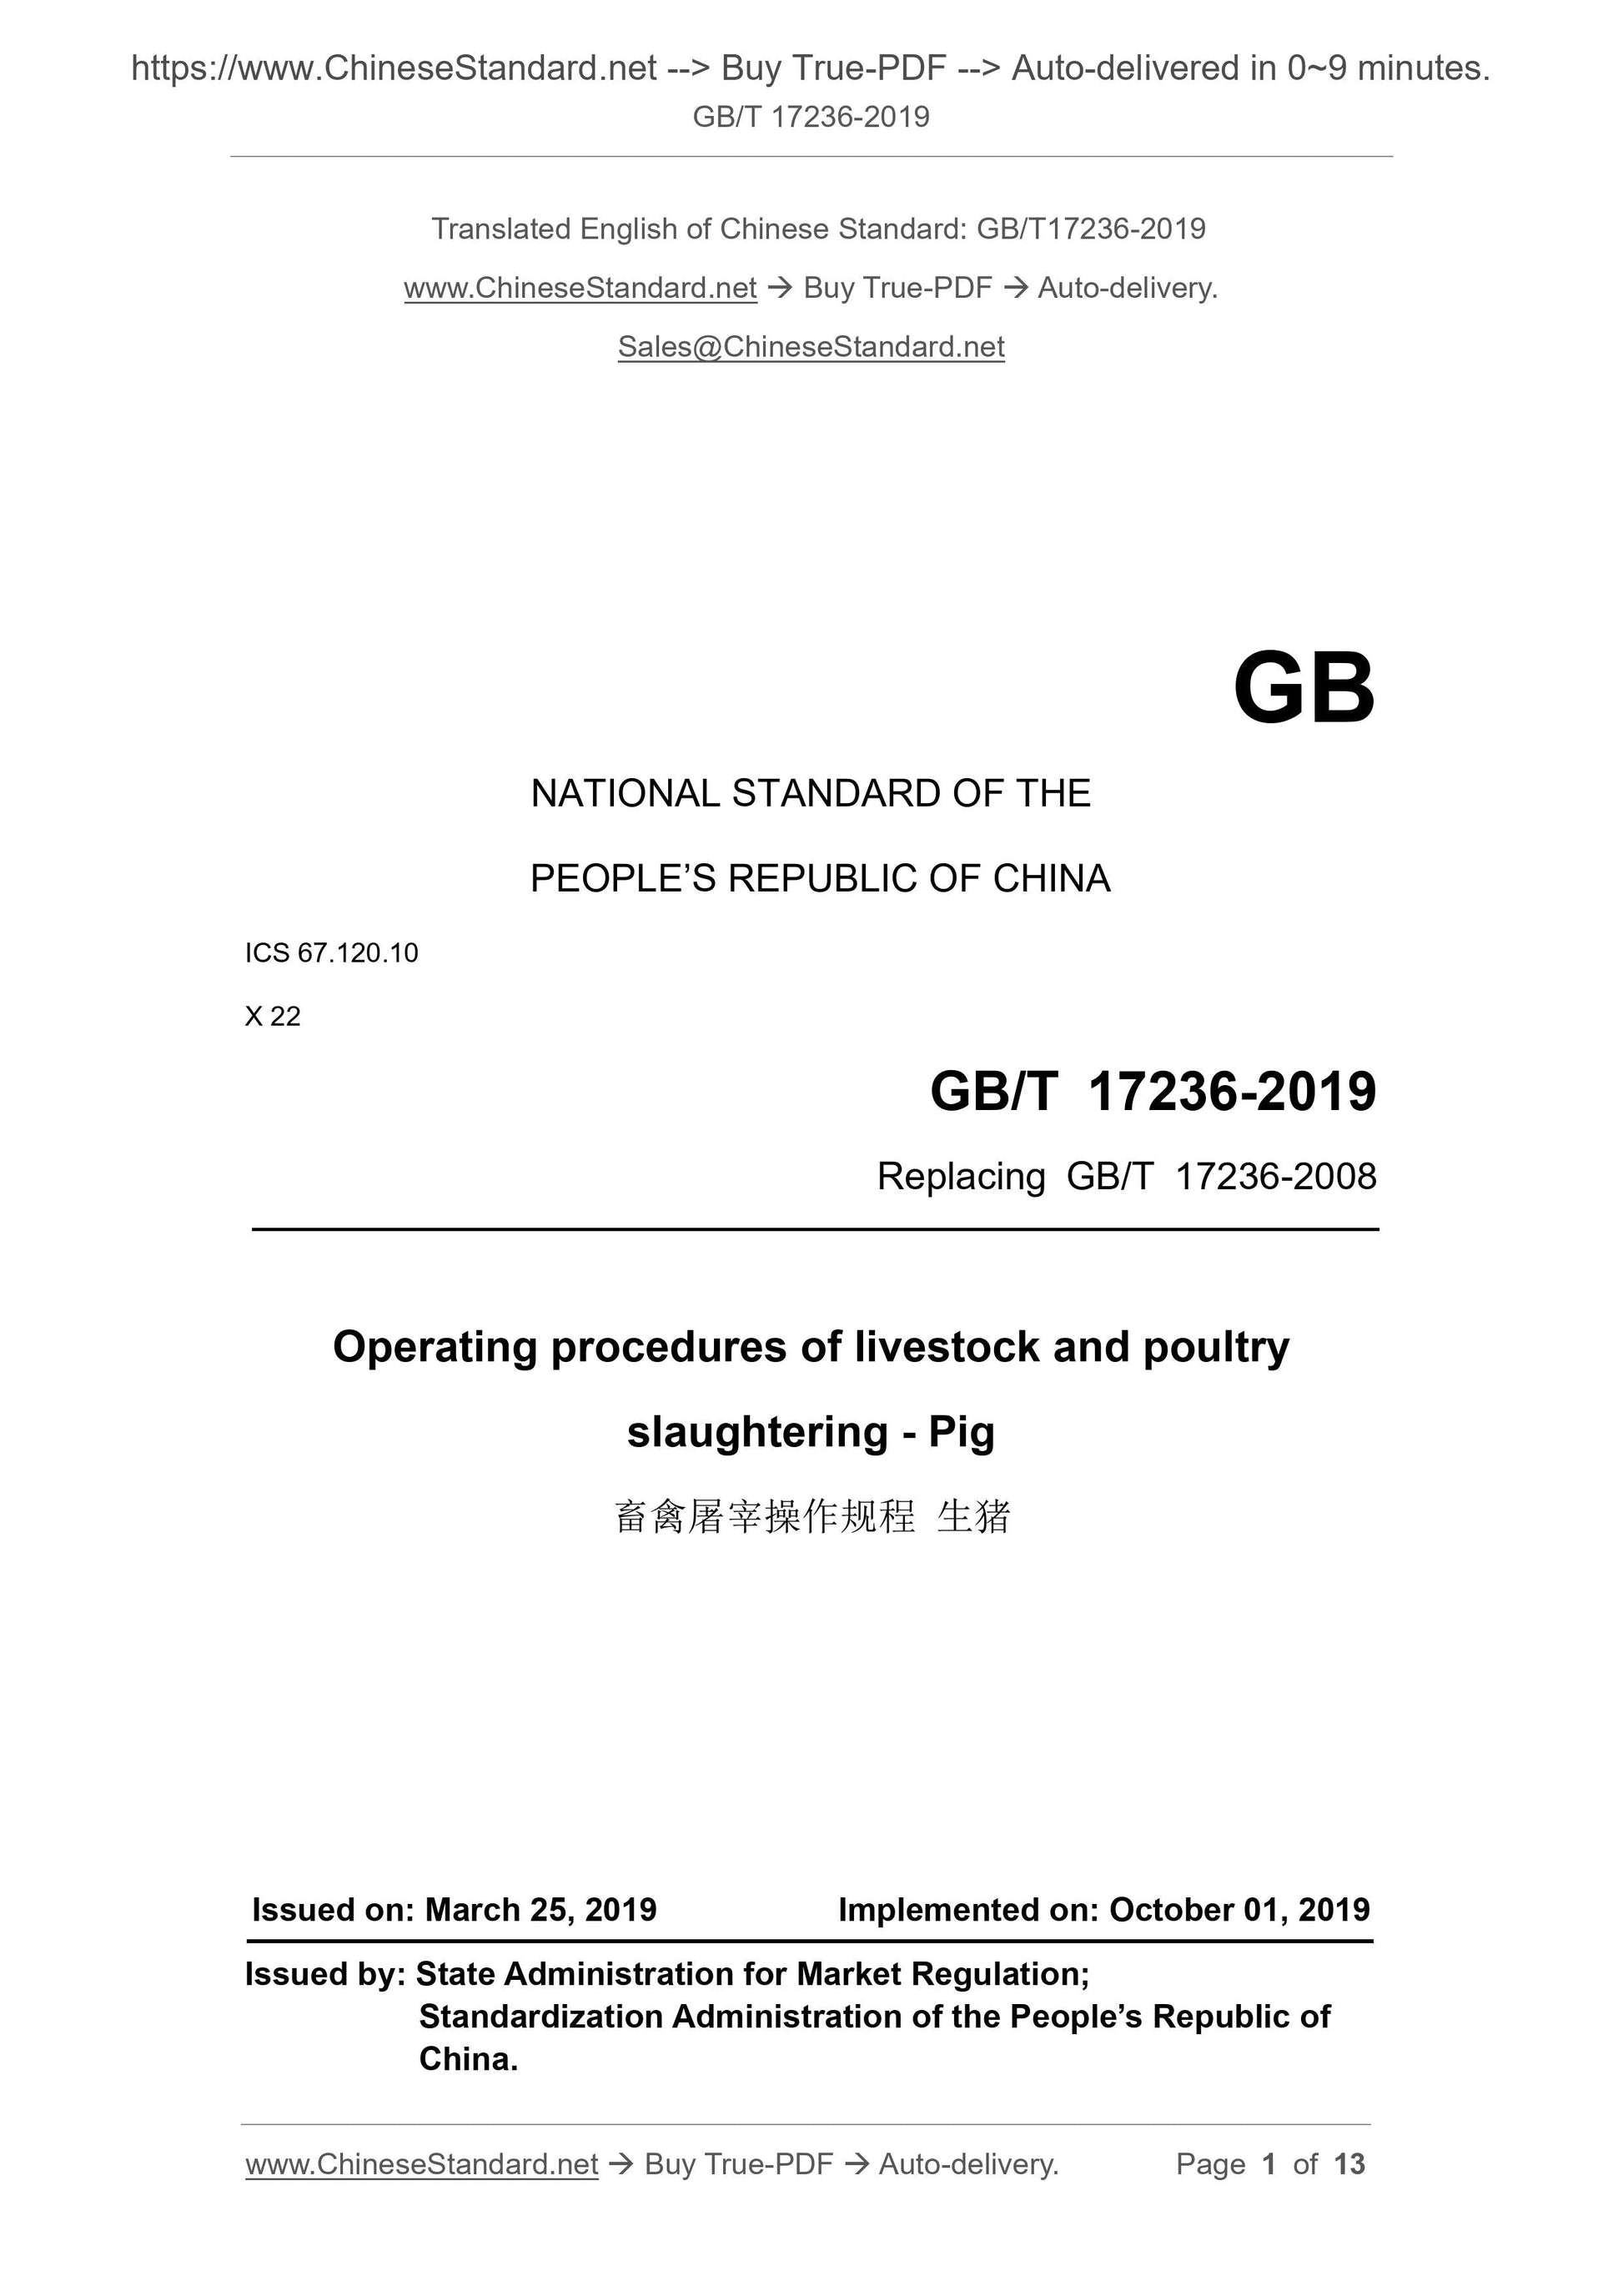 GB/T 17236-2019 Page 1